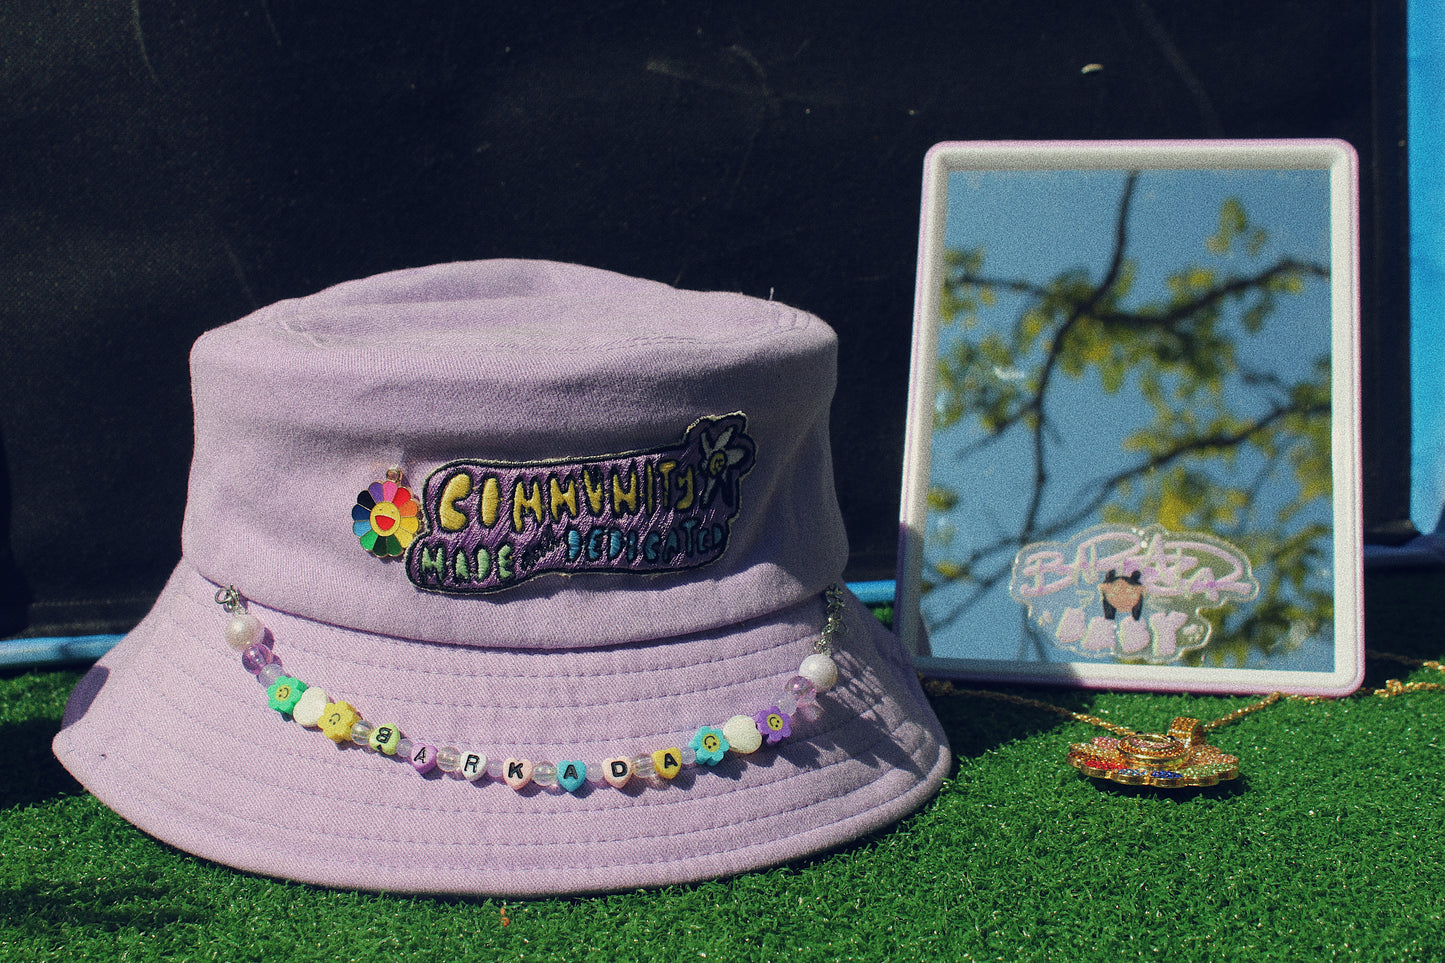 purple community made hat sitting on fake grass next to a mirror and gold necklace